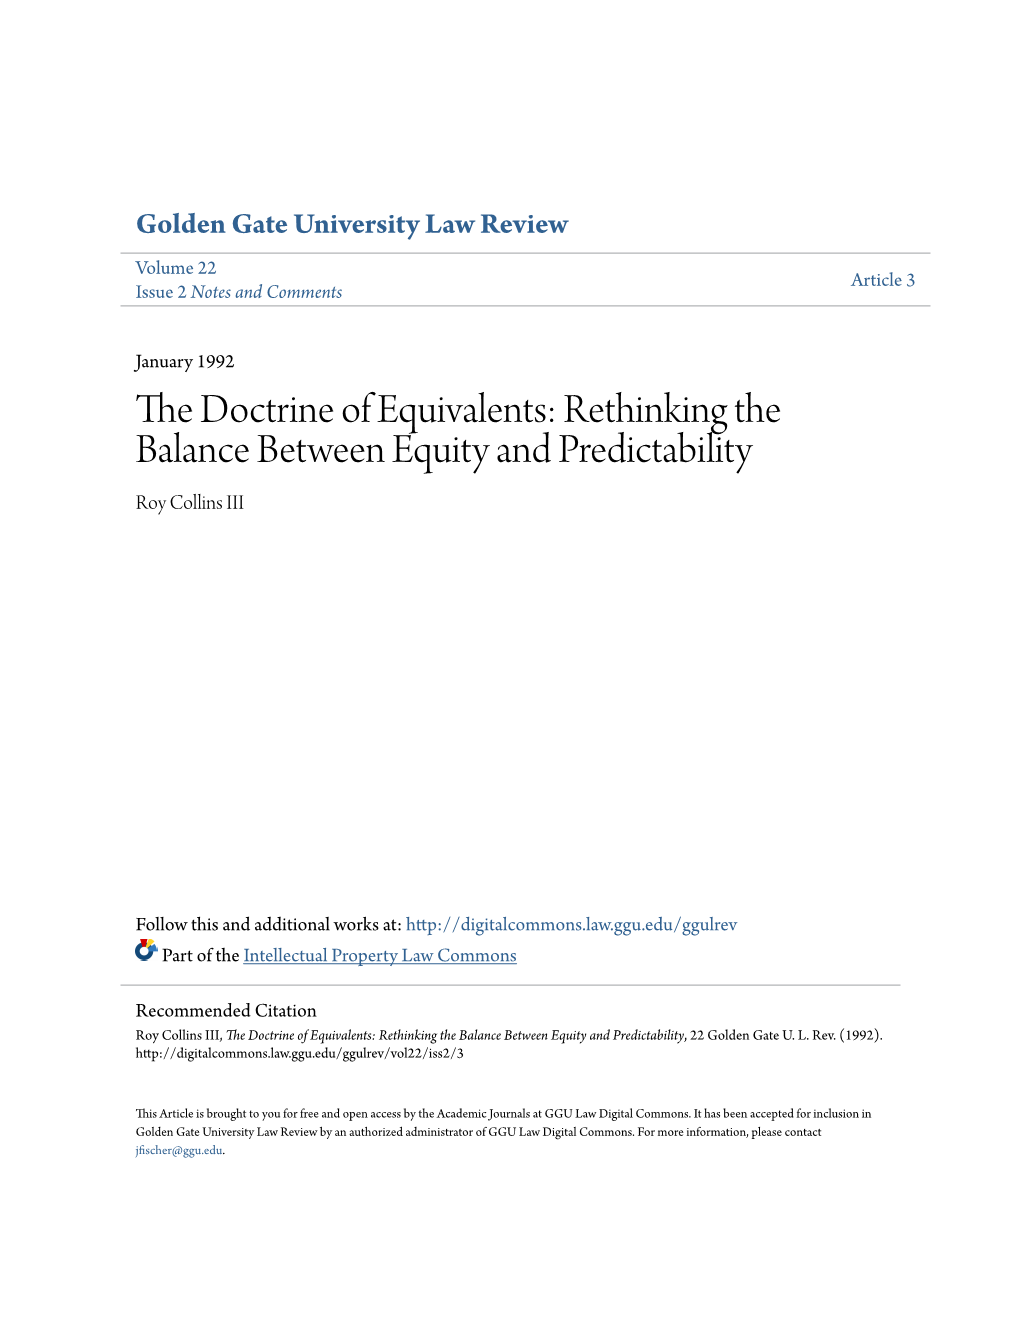 The Doctrine of Equivalents: Rethinking the Balance Between Equity and Predictability, 22 Golden Gate U